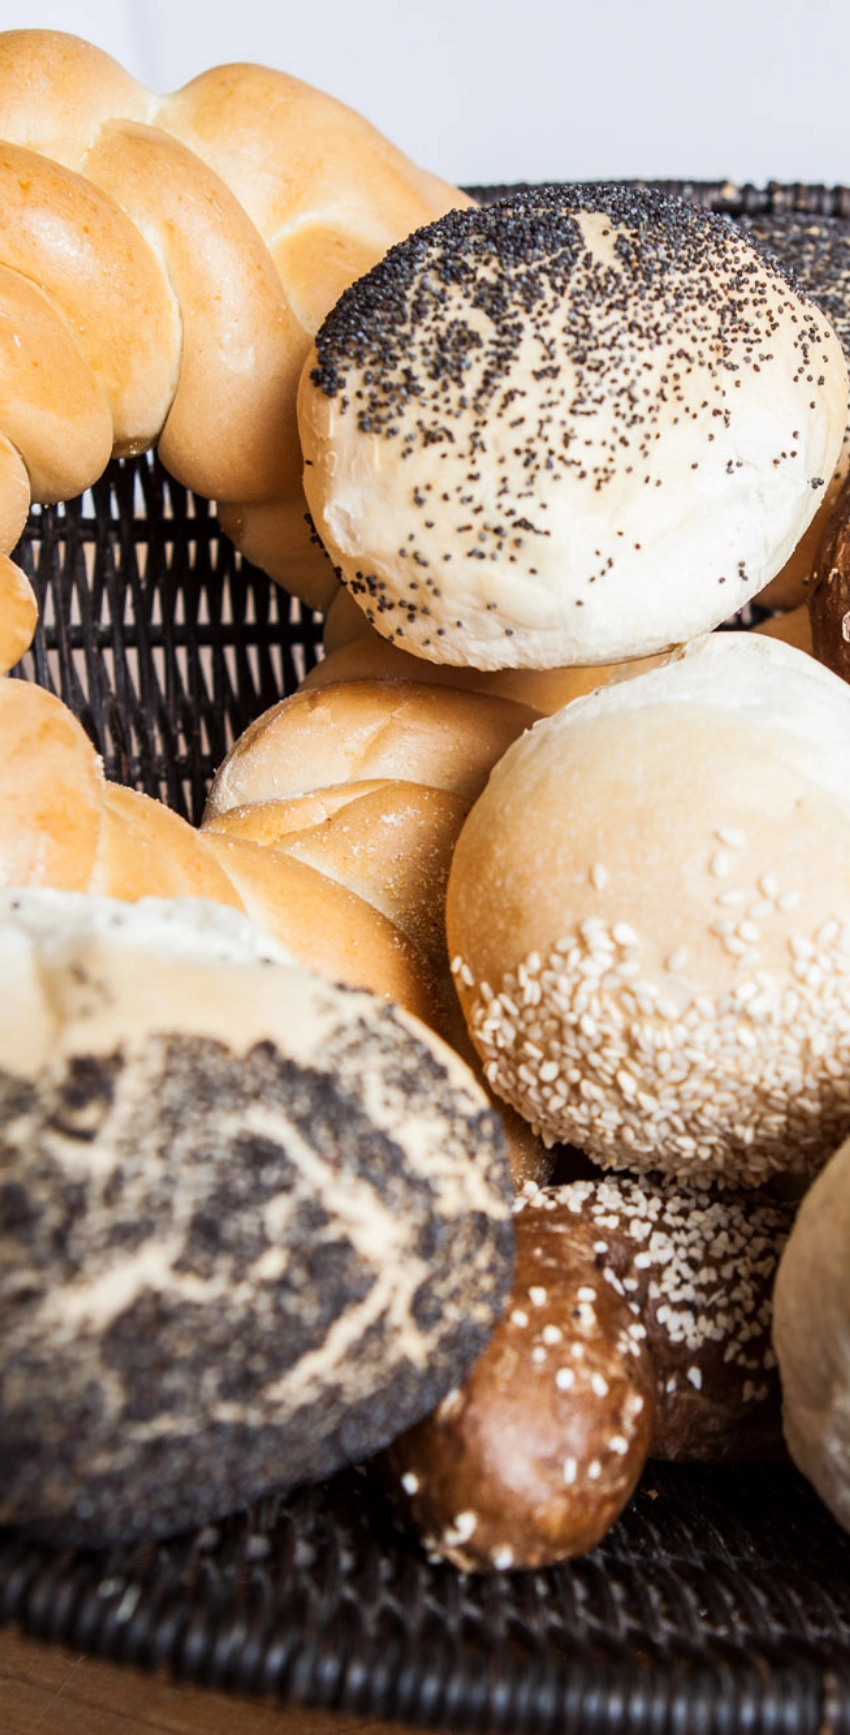 A basket containing a variety of bread rolls, including sesame seed, poppy seed, and plain.